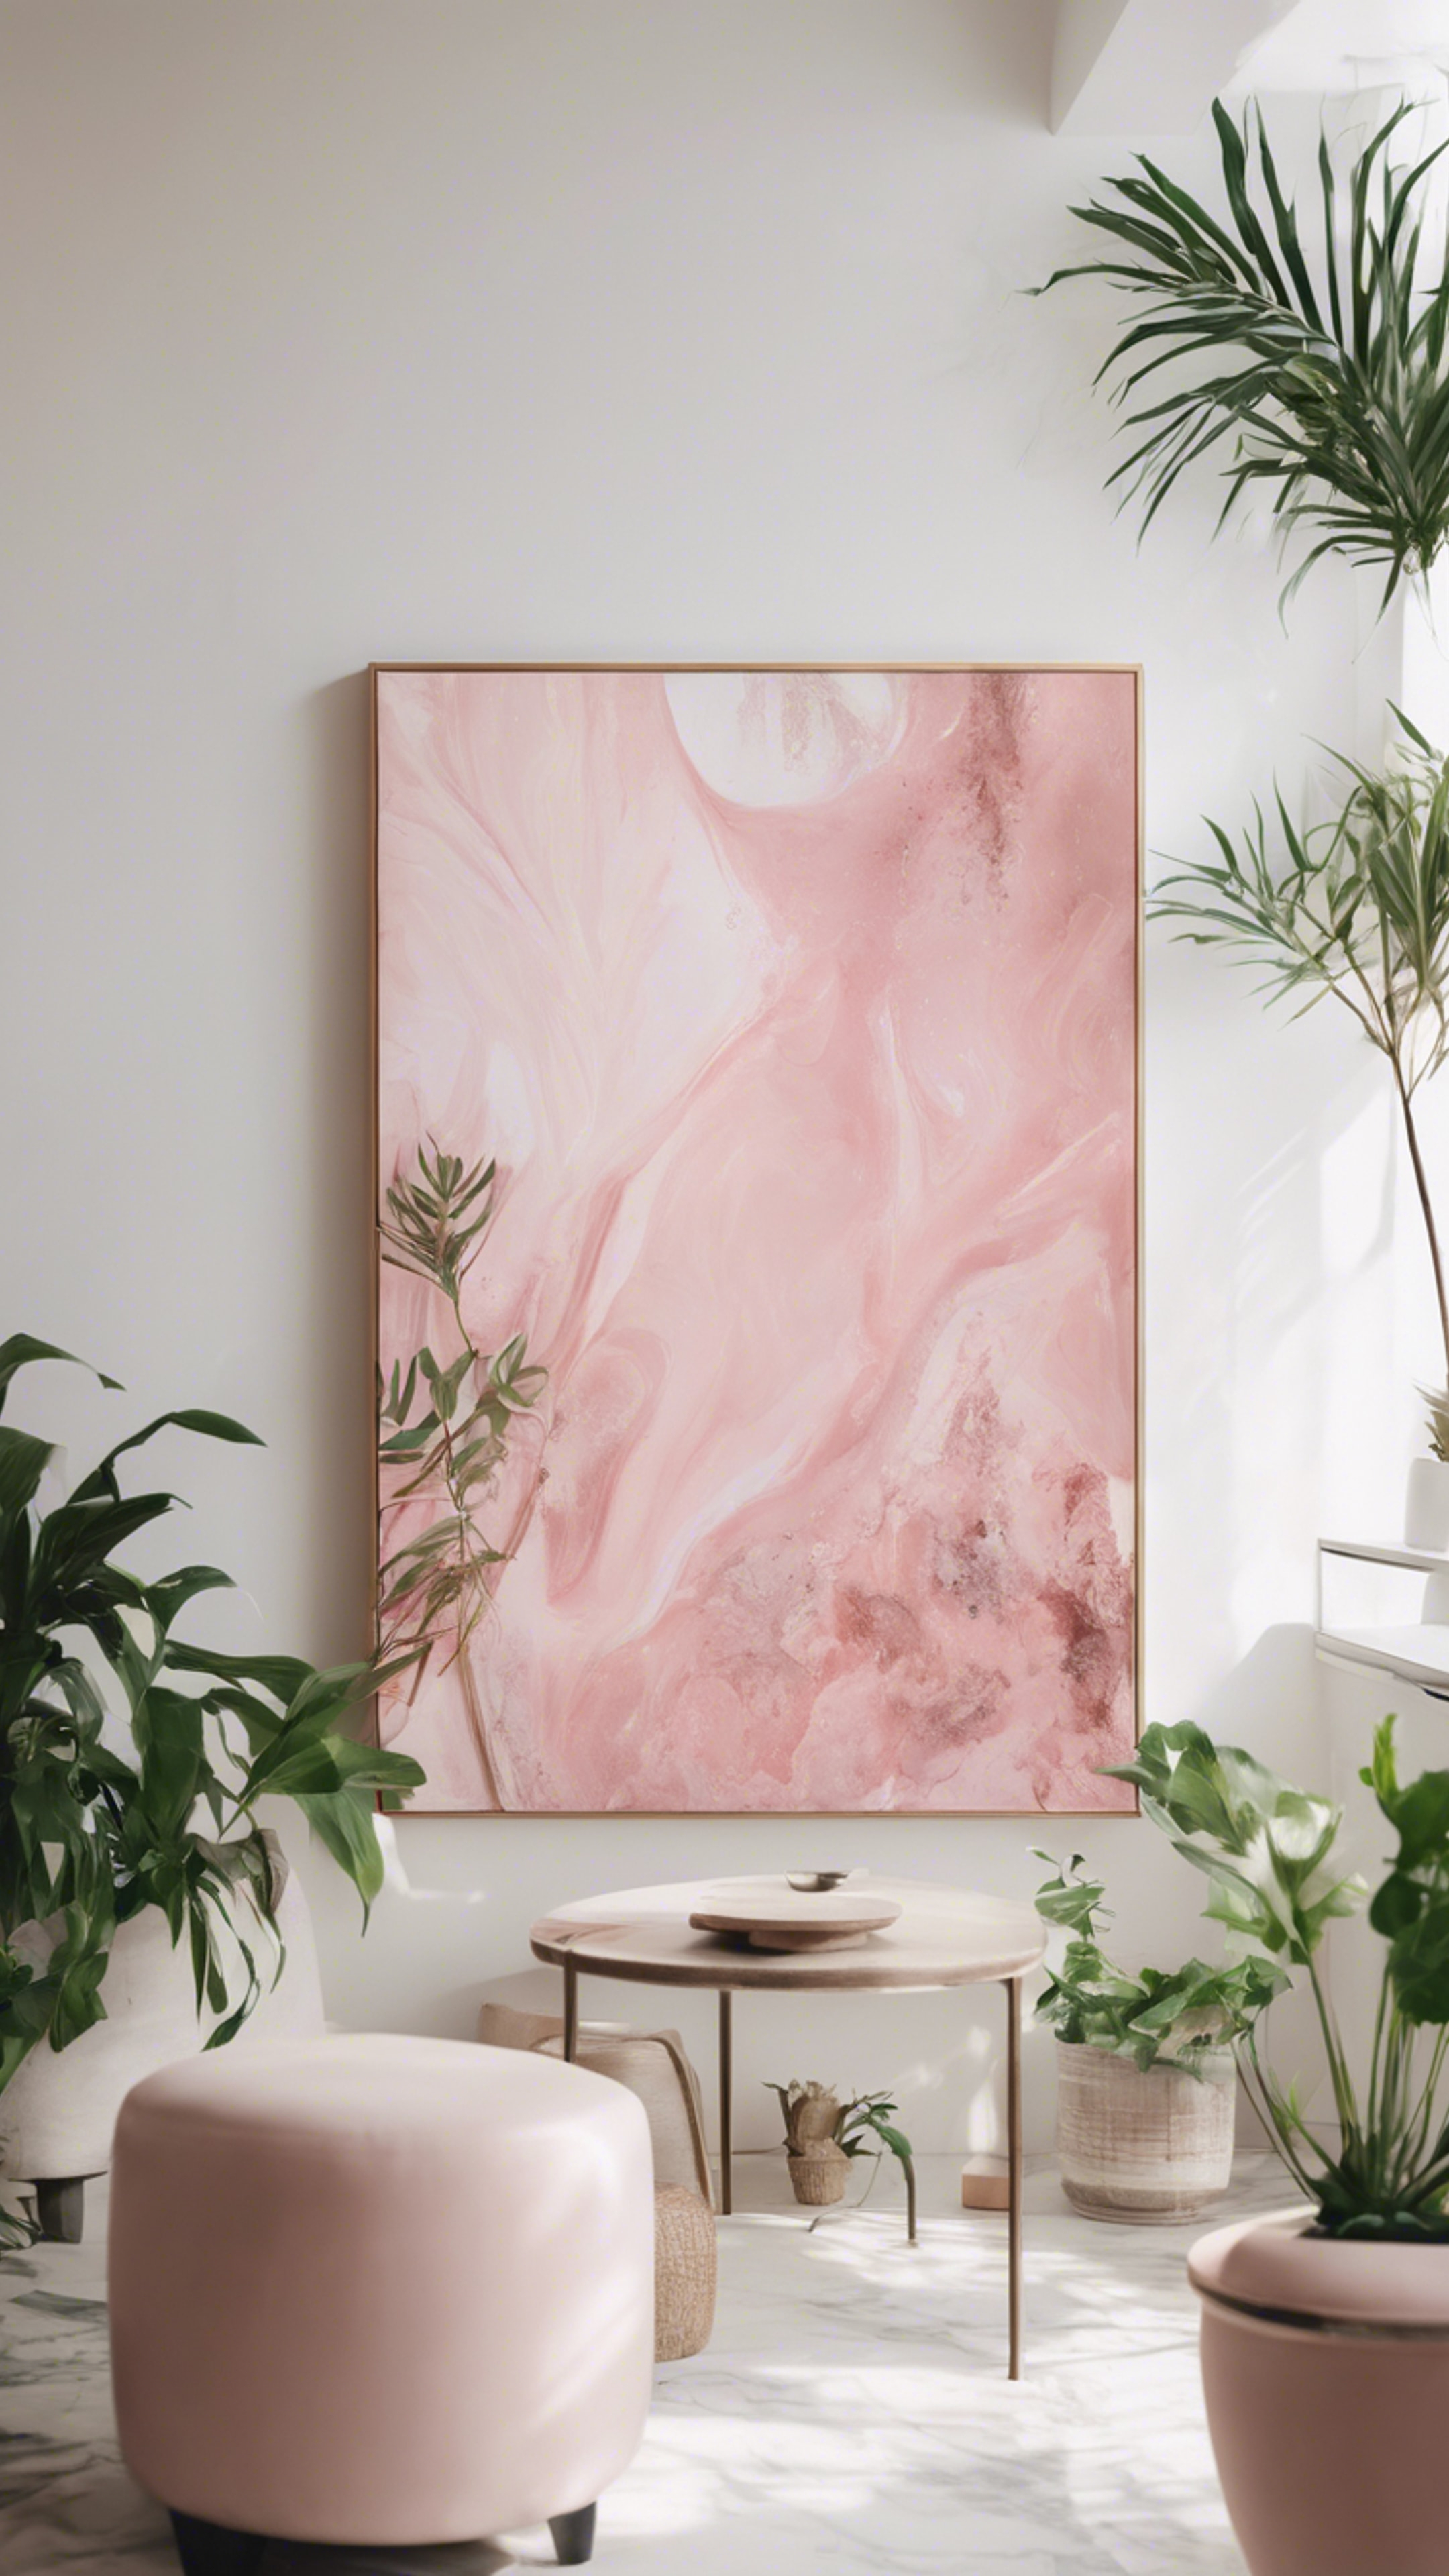 A soft pink abstract painting on a white wall surrounded by indoor plants, enhancing the aesthetic of the room Papel de parede[9fa4f1f3650f4fbb9955]